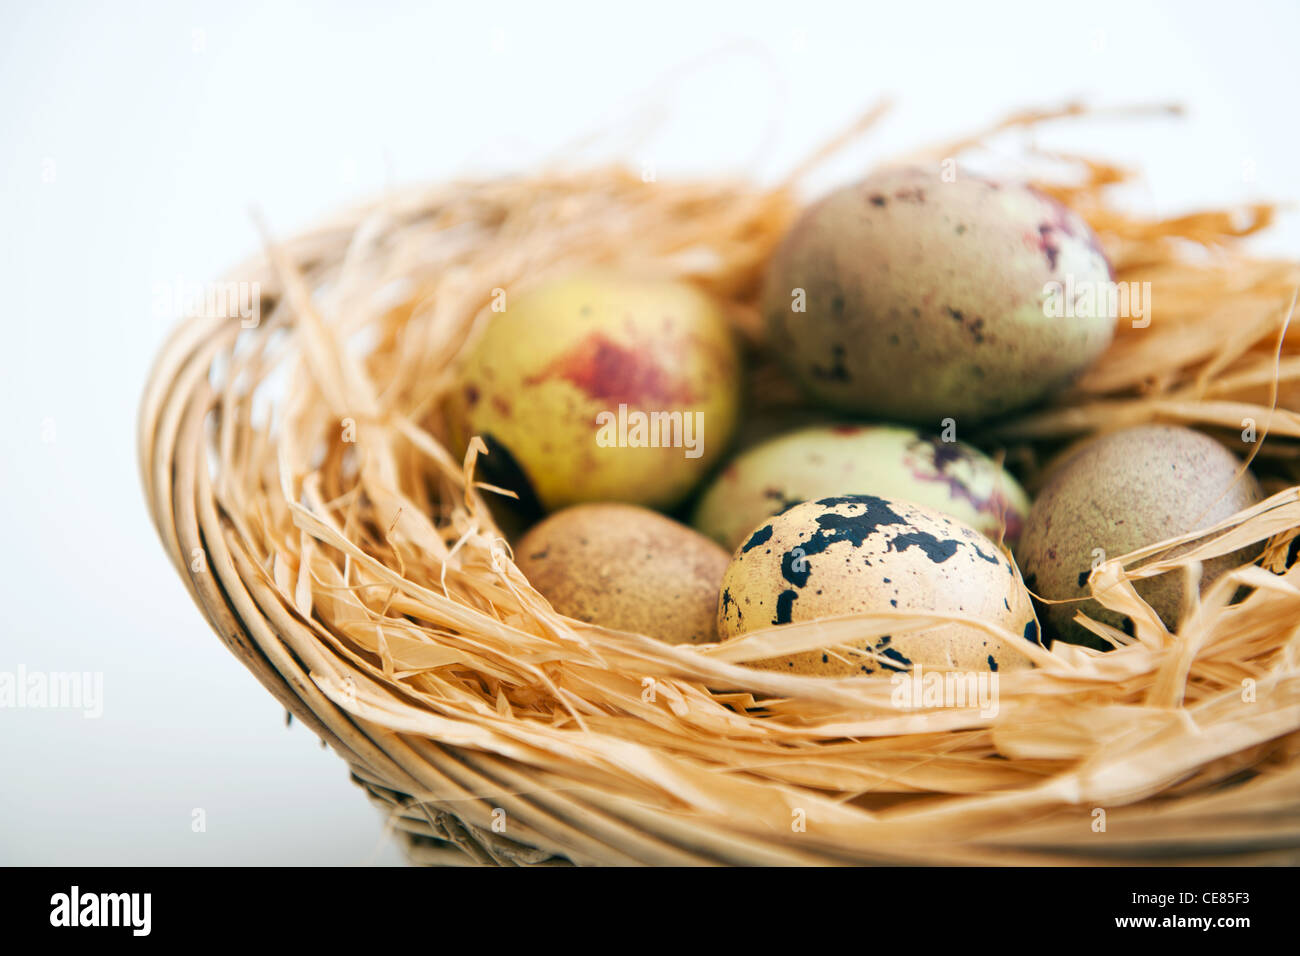 Close up of ornate quails eggs in a basket Stock Photo